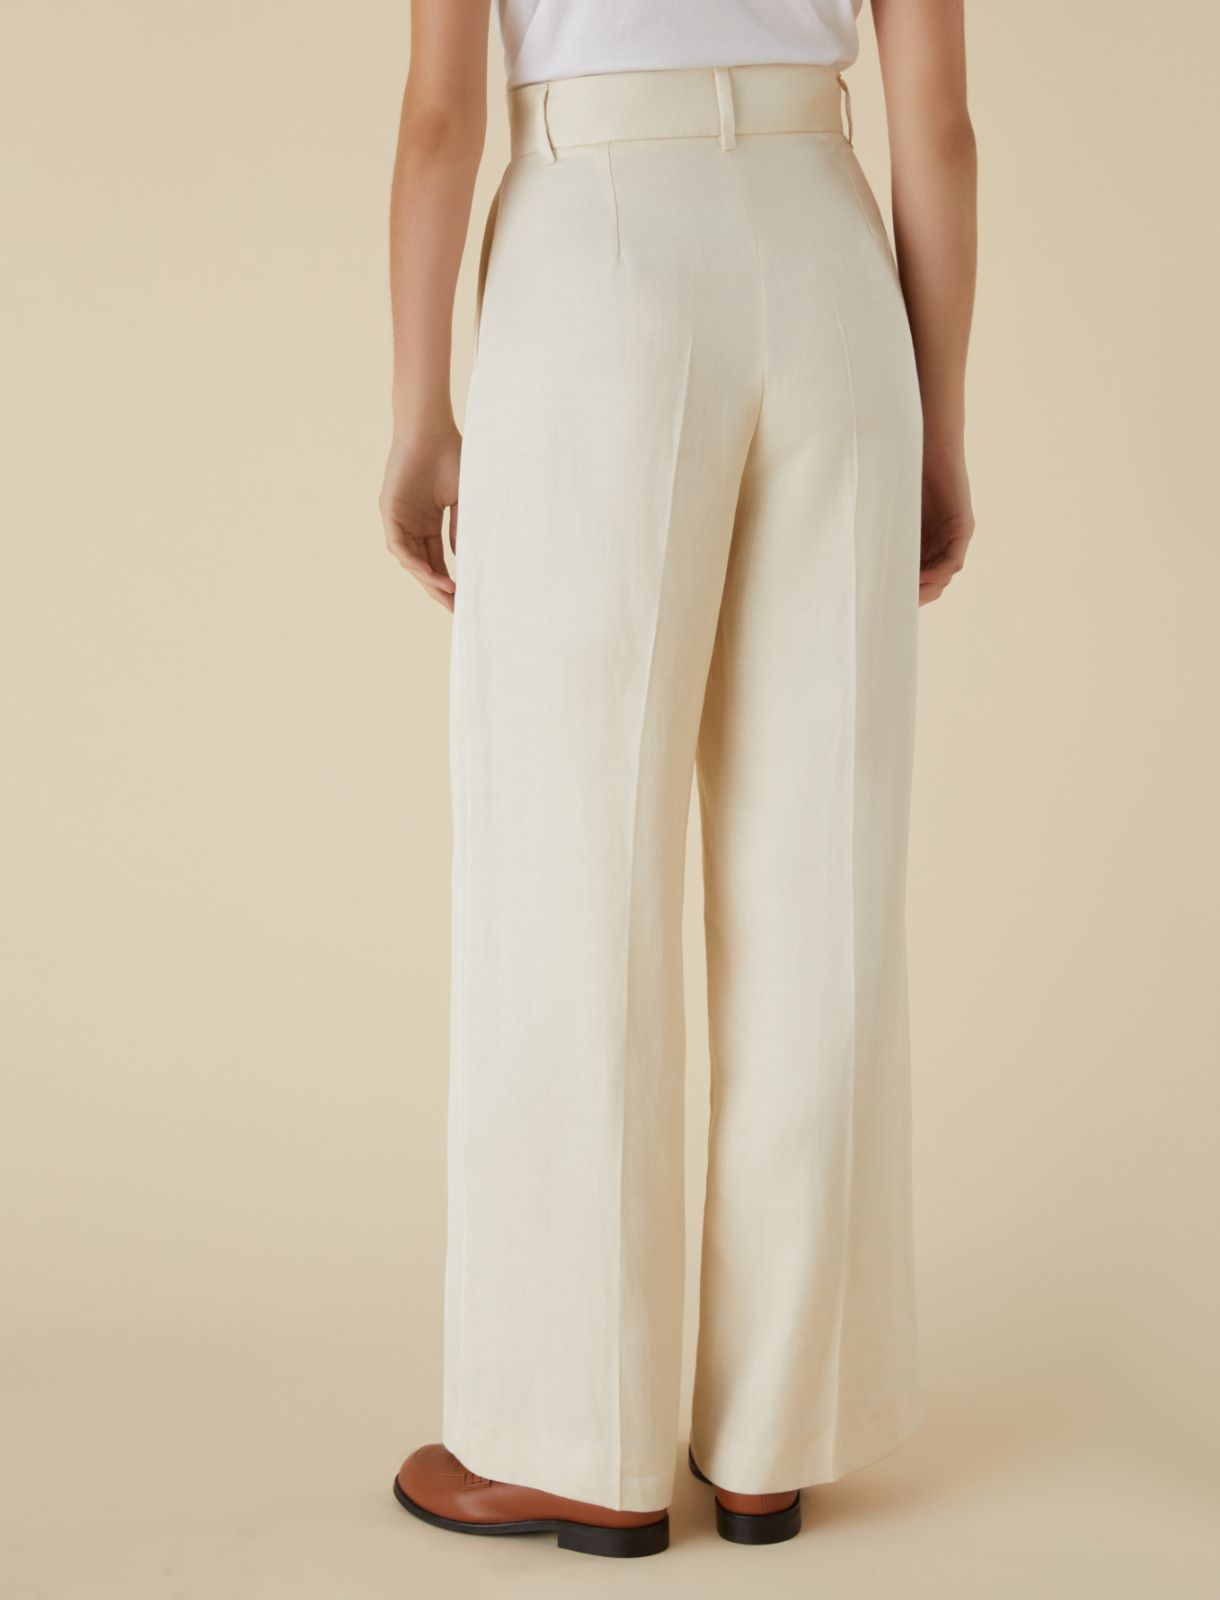 Under Wraps Petite Wide Leg Trousers in Cream – Oh Polly US